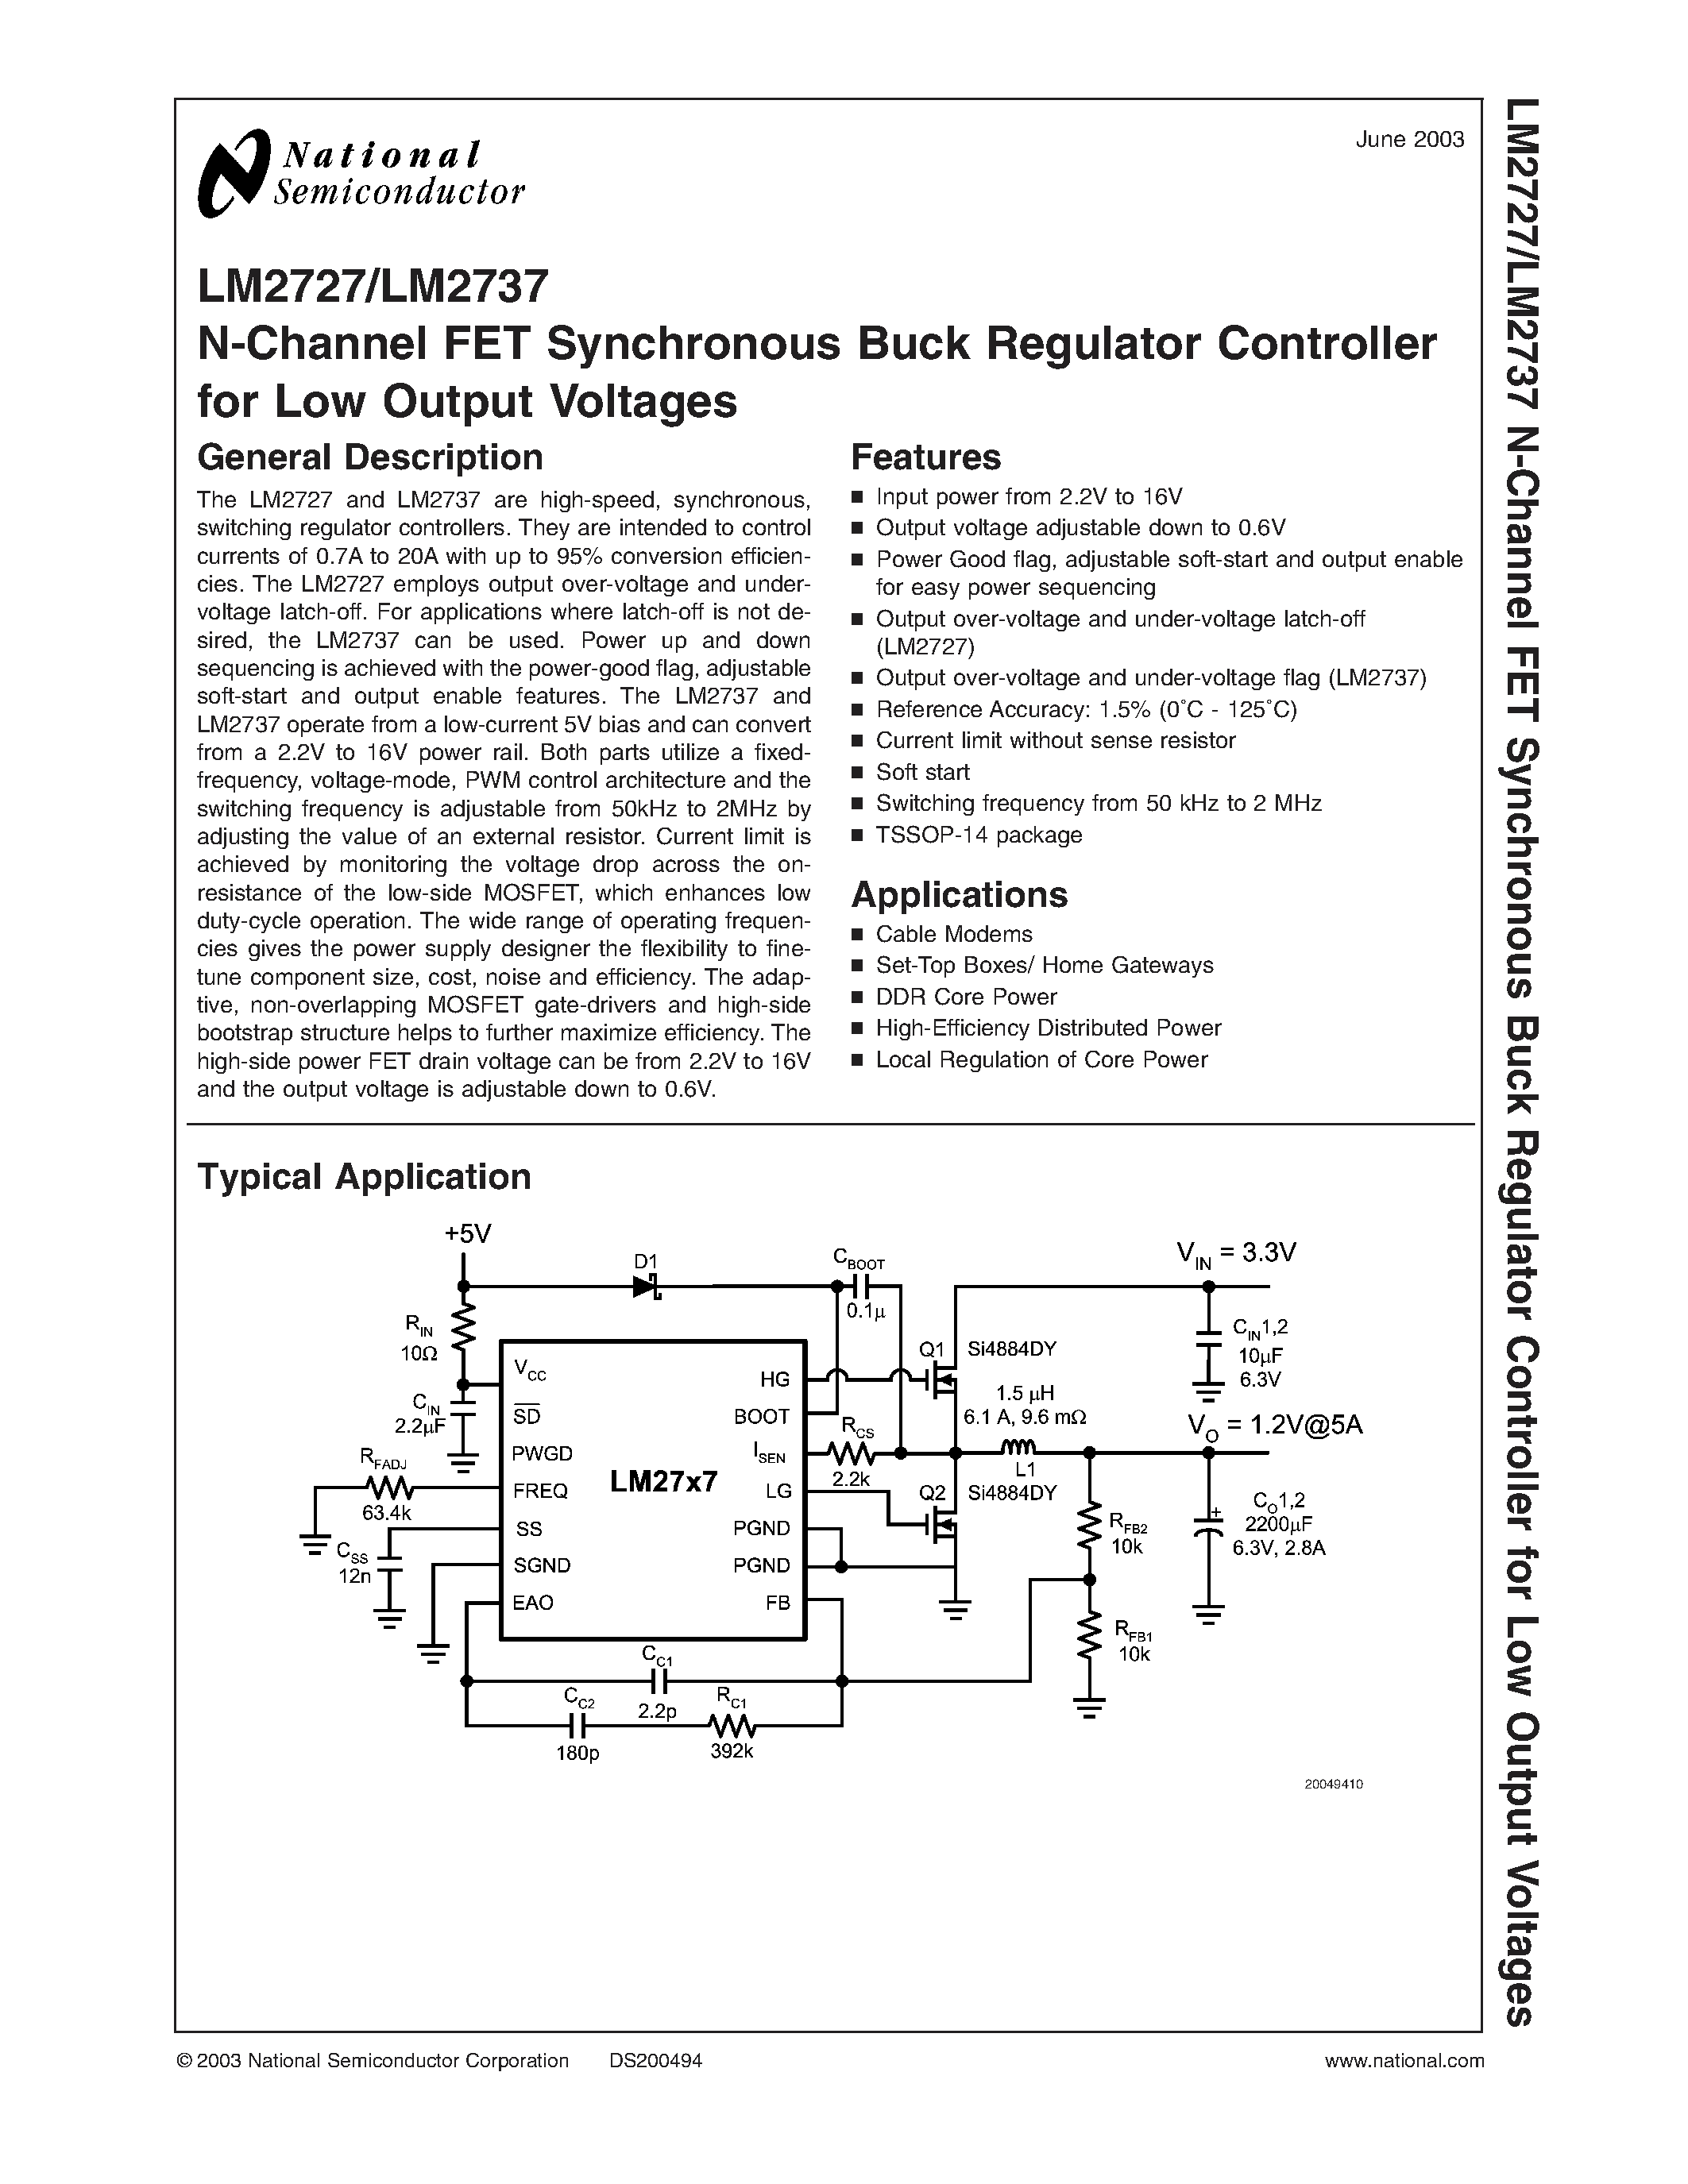 Datasheet A220 - N-Channel FET Synchronous Buck Regulator Controller for Low Output Voltages page 1